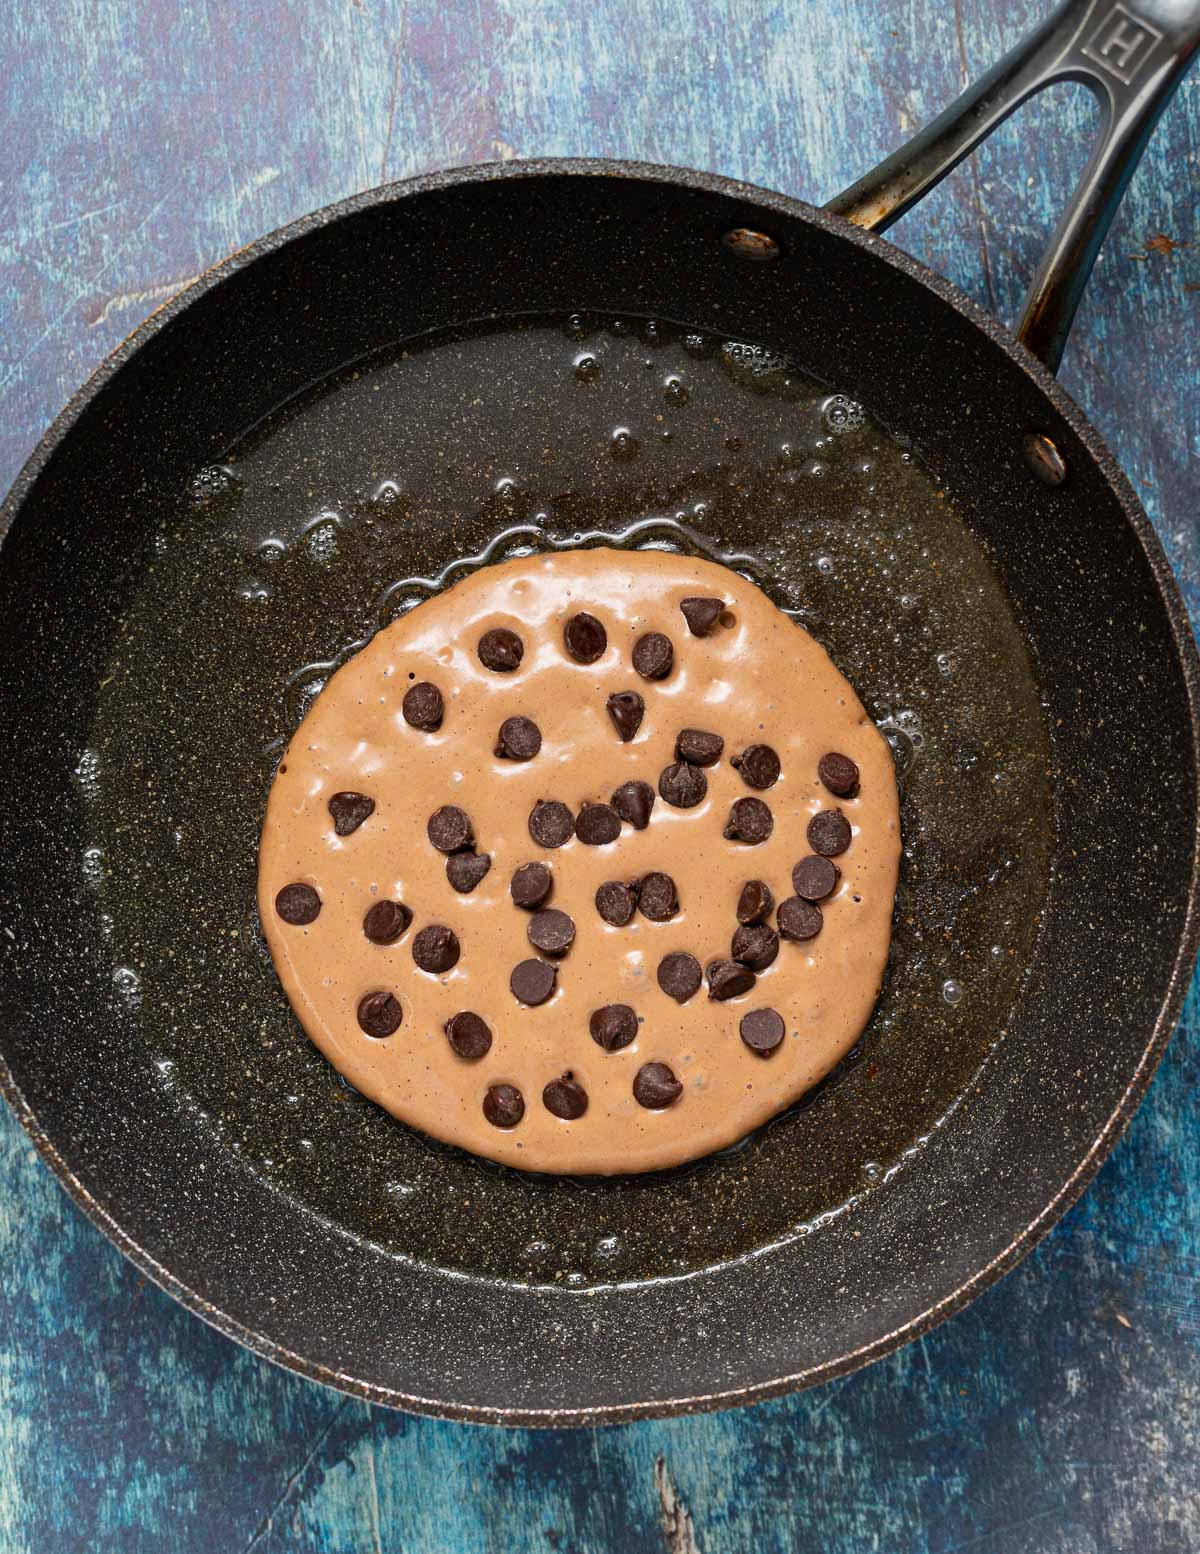 an uncooked pancake with chocolate chips sprinkled on it